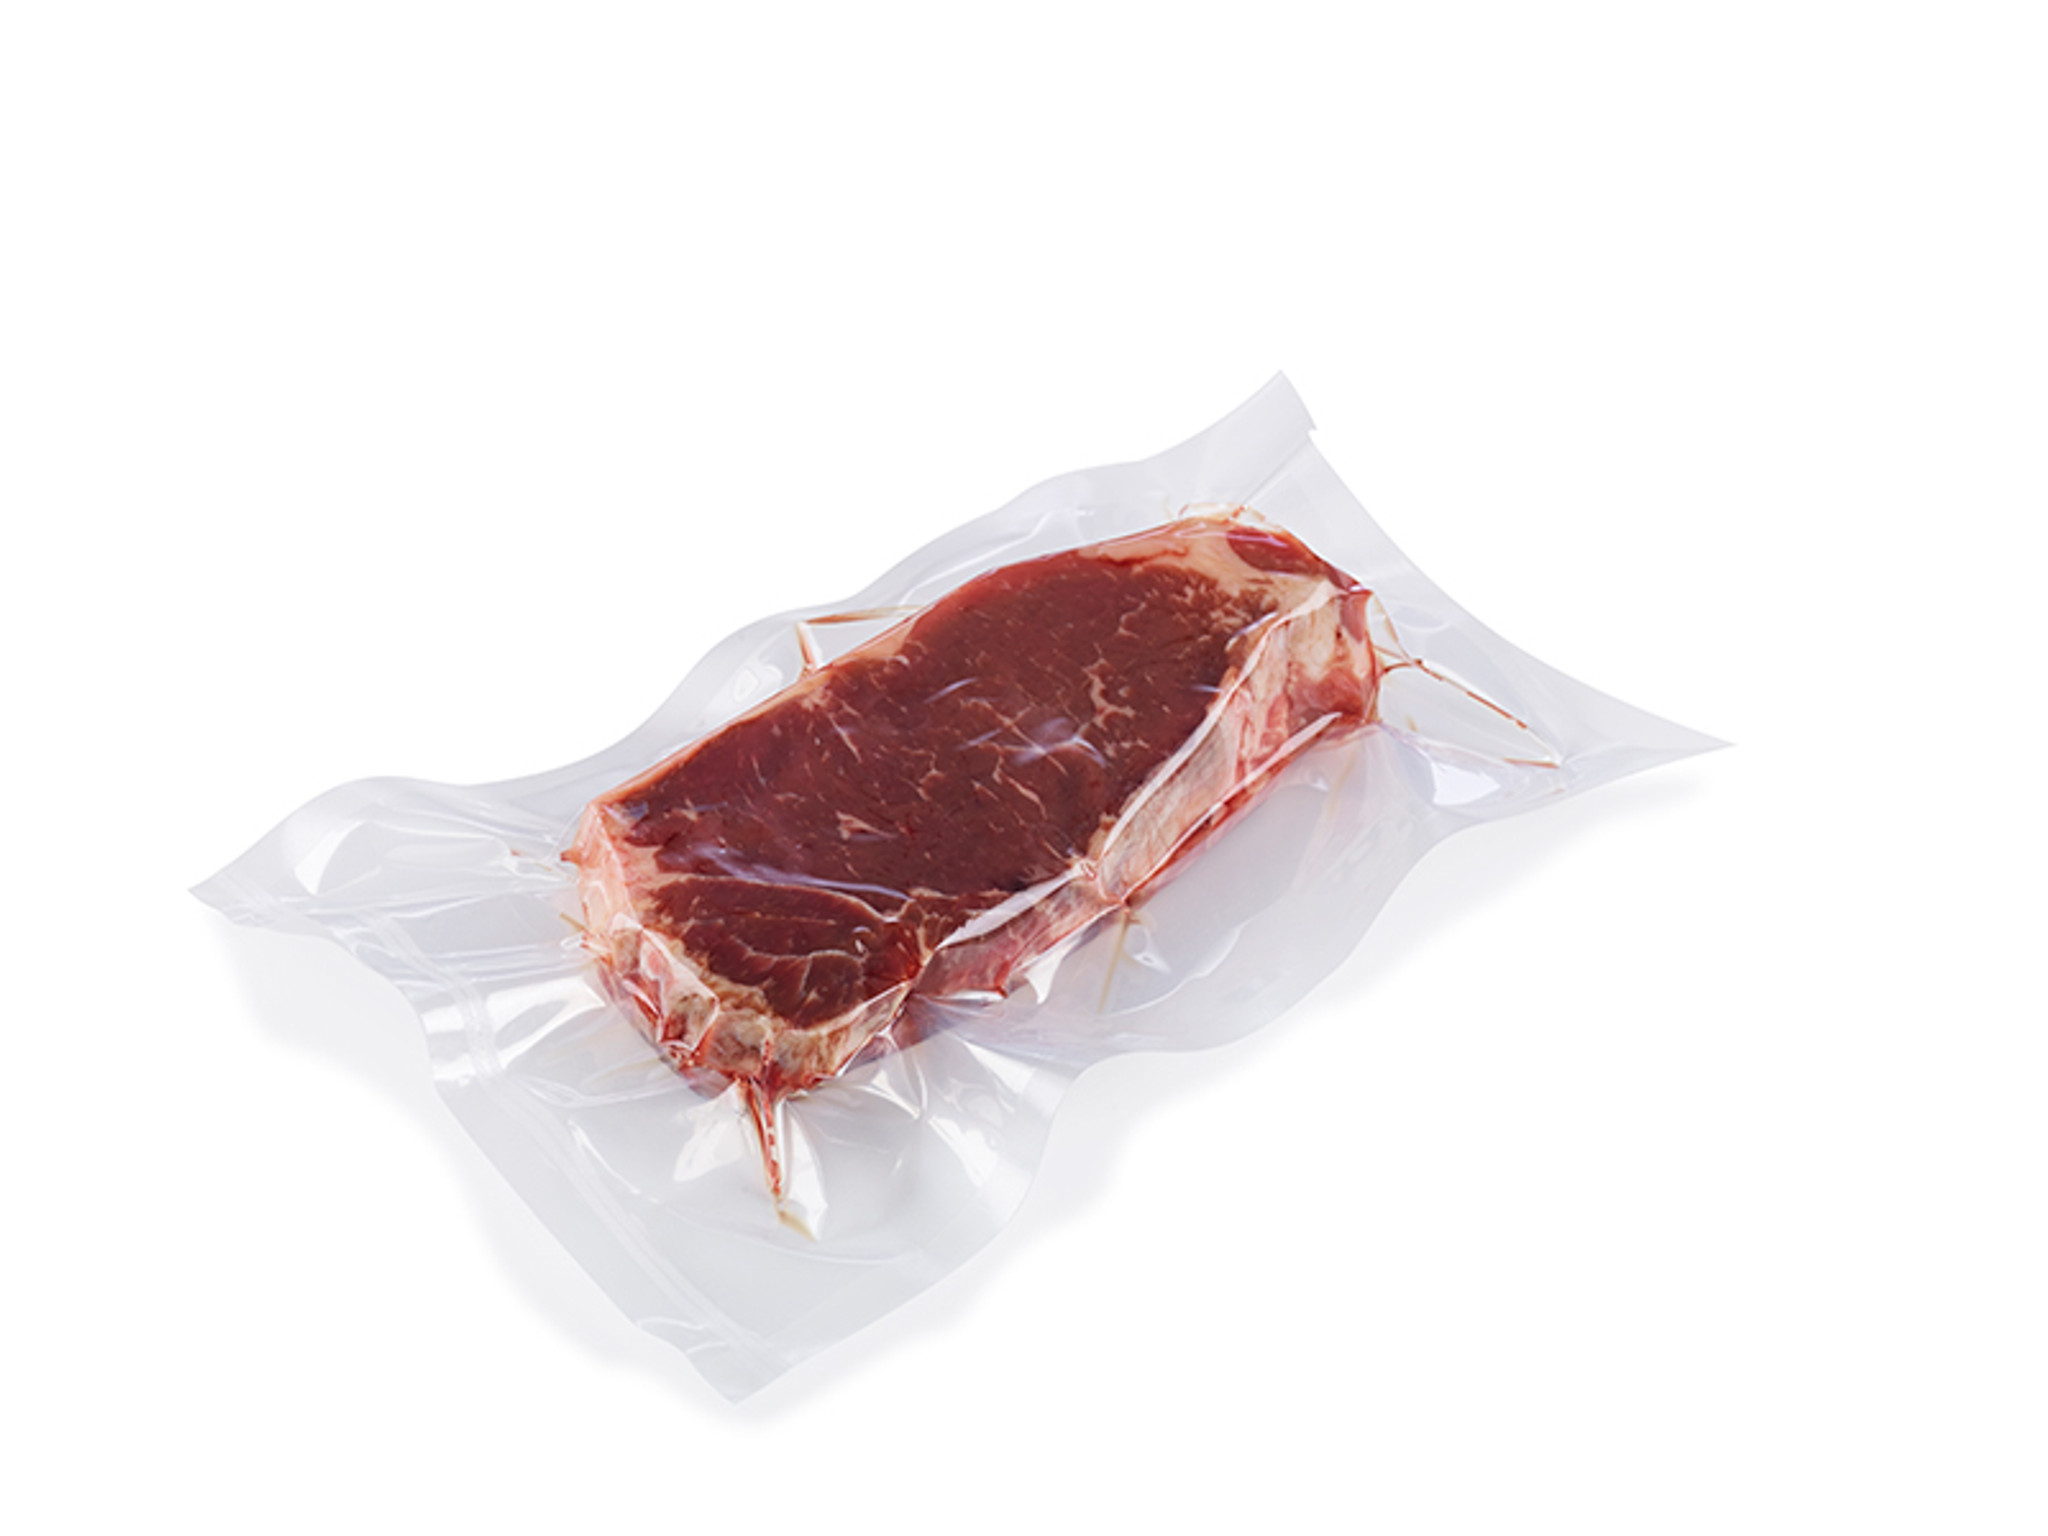 Boilable Vacuum Bags / Re-therm Chamber Vacuum Sealer Pouches / Cook-in bag  for Sous Vide Cooking China Vac Bag Manufacture Supply Manufacturers and  Suppliers - China Factory - GreenPak